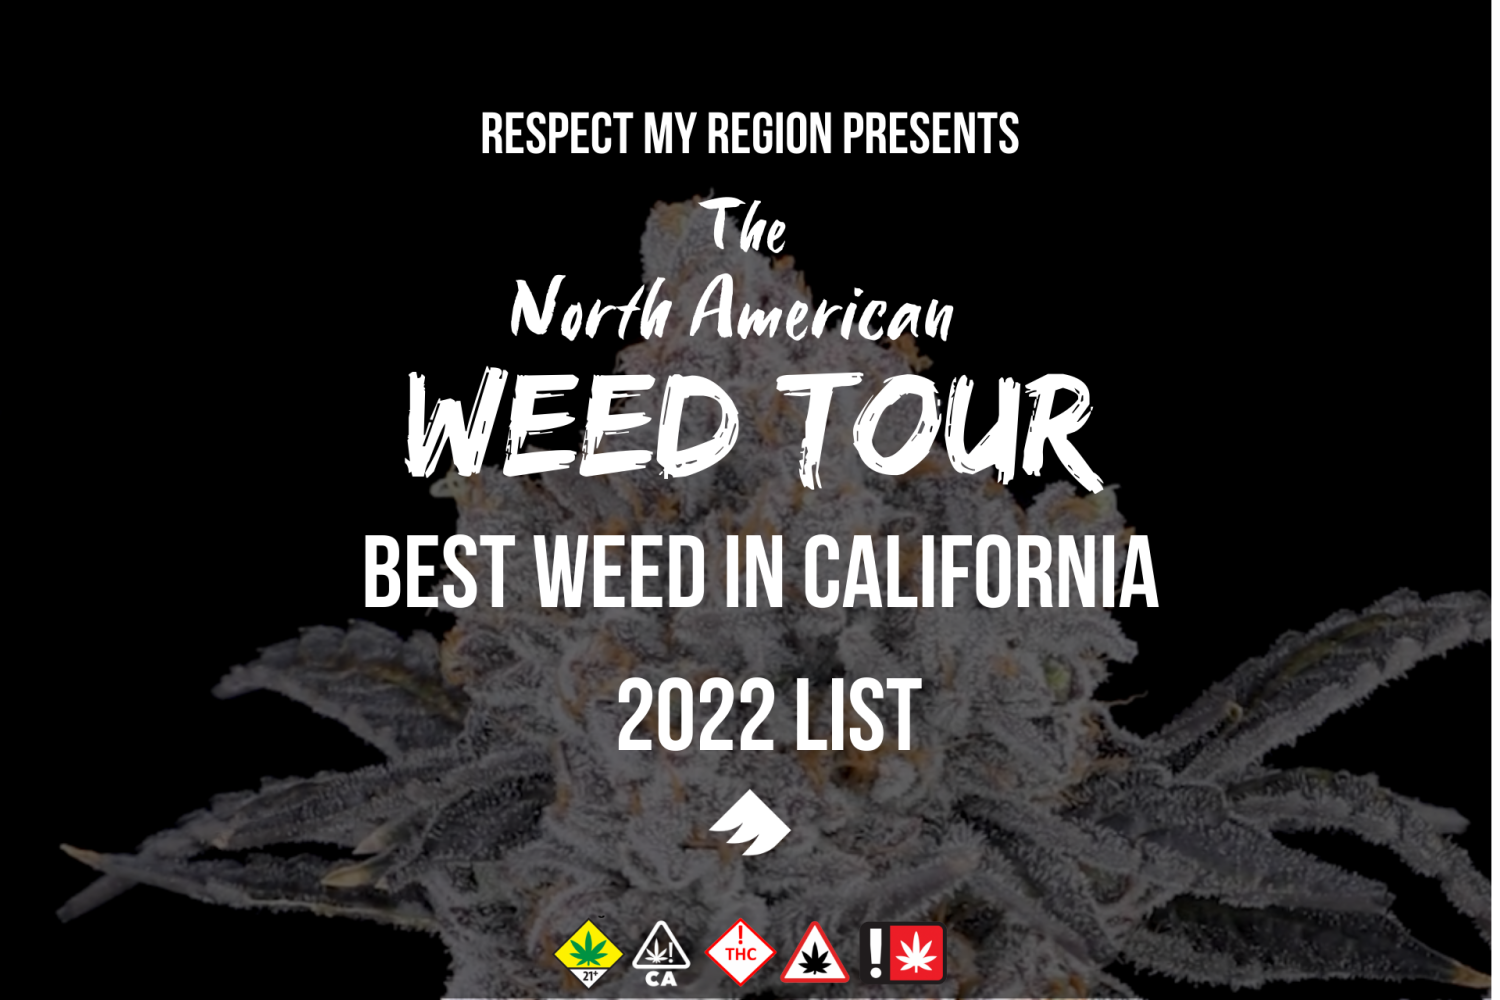 The Best Weed In California 2022 (North American Weed Tour Official List)